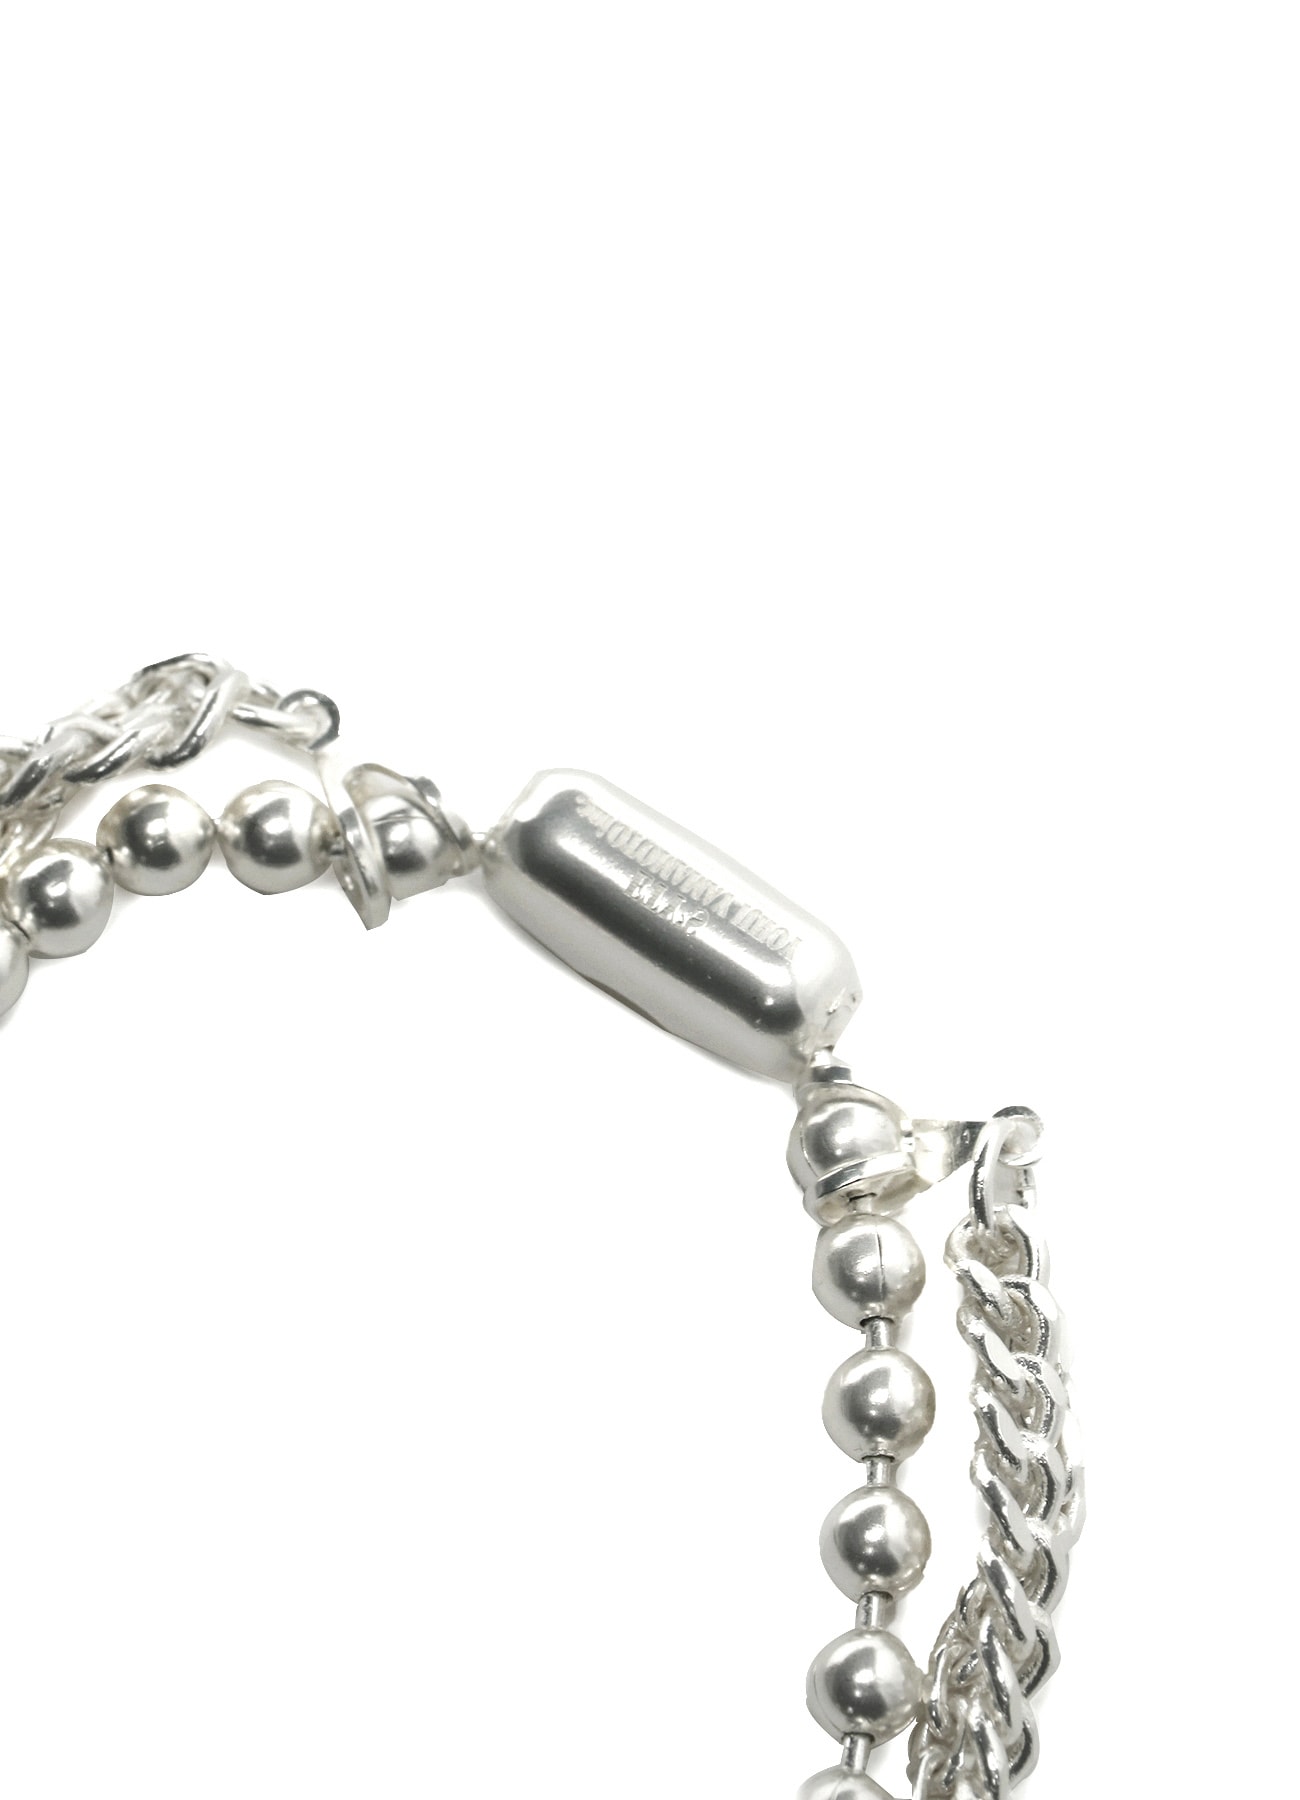 BRASS BALL CHAIN THREE-STRAND NECKLACE(FREE SIZE Silver): S'YTE 